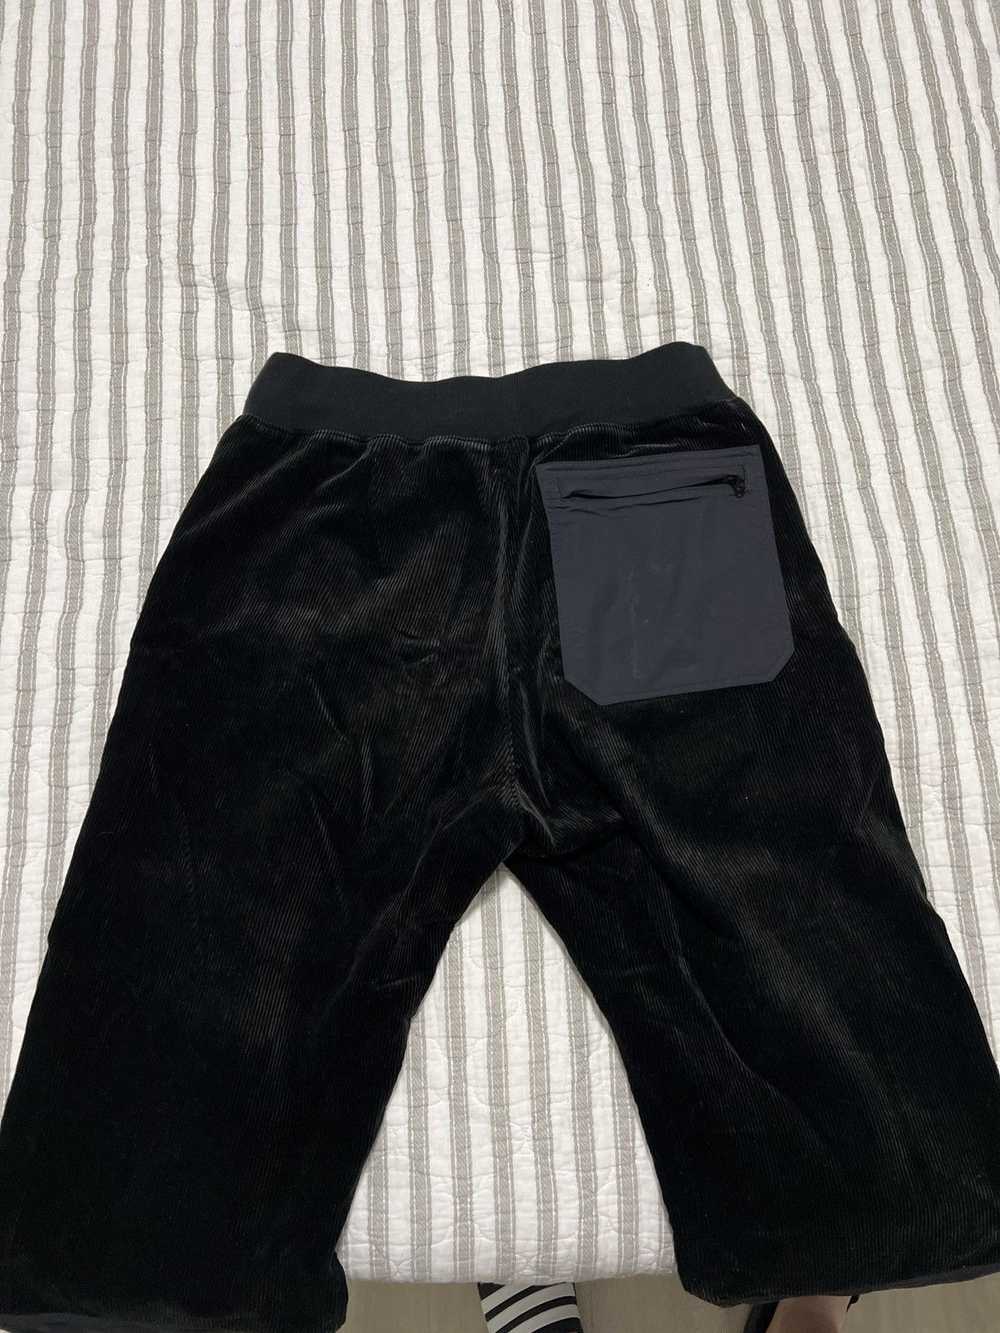 Undercover Undercover Corduroy Pants Sample - image 6